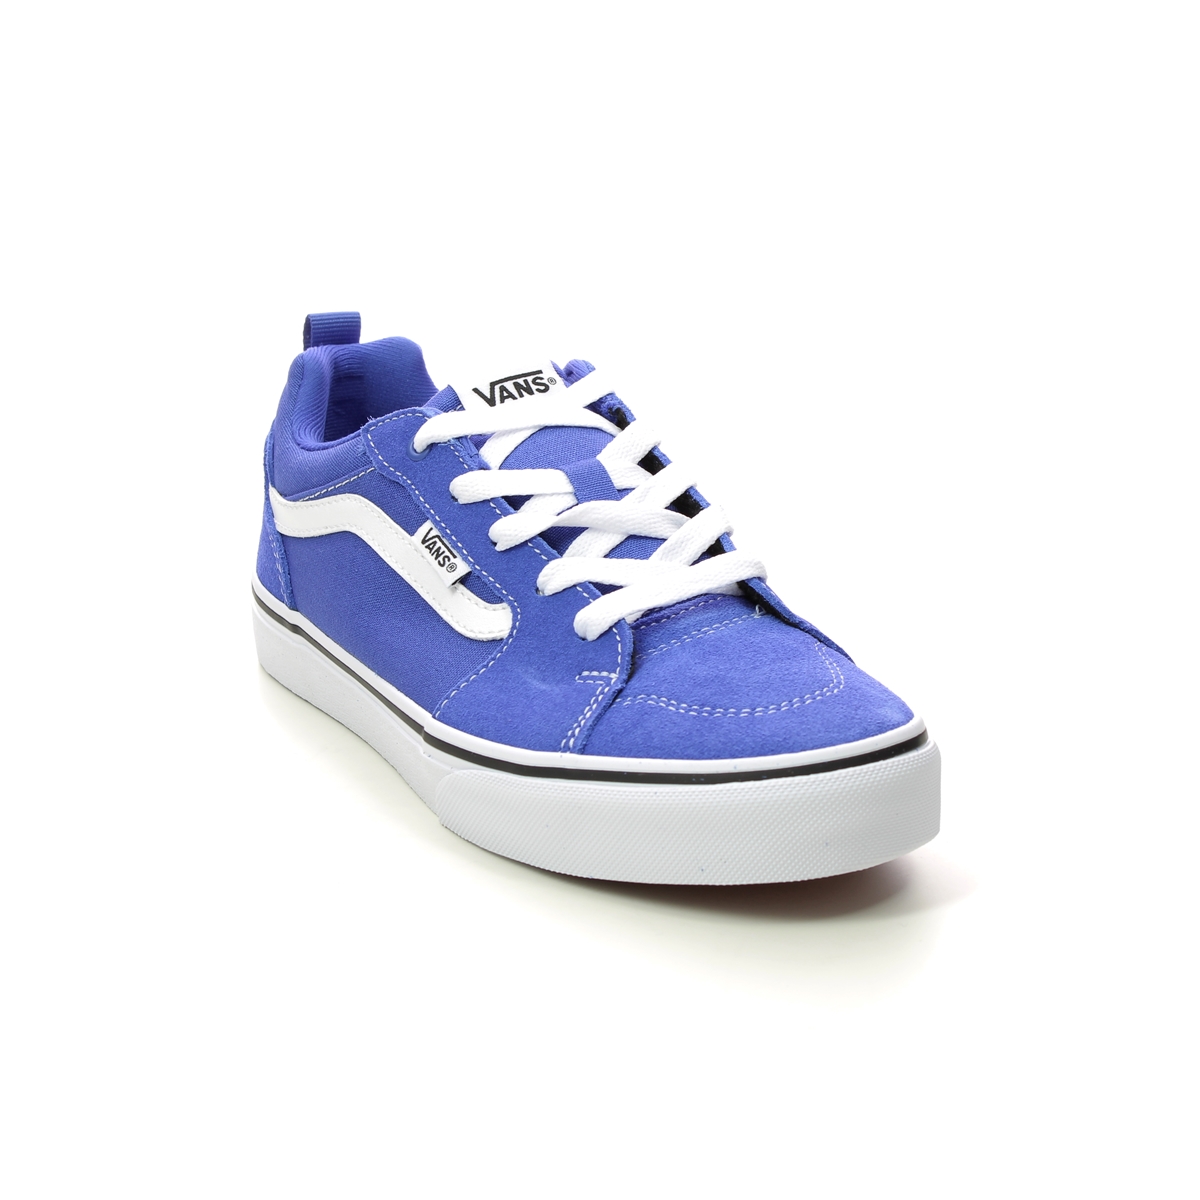 Vans Filmore Youth Blue Kids Trainers  Vn0A3Mvpb-Bt In Size 3 In Plain Blue Vans Boys Trainers For kids